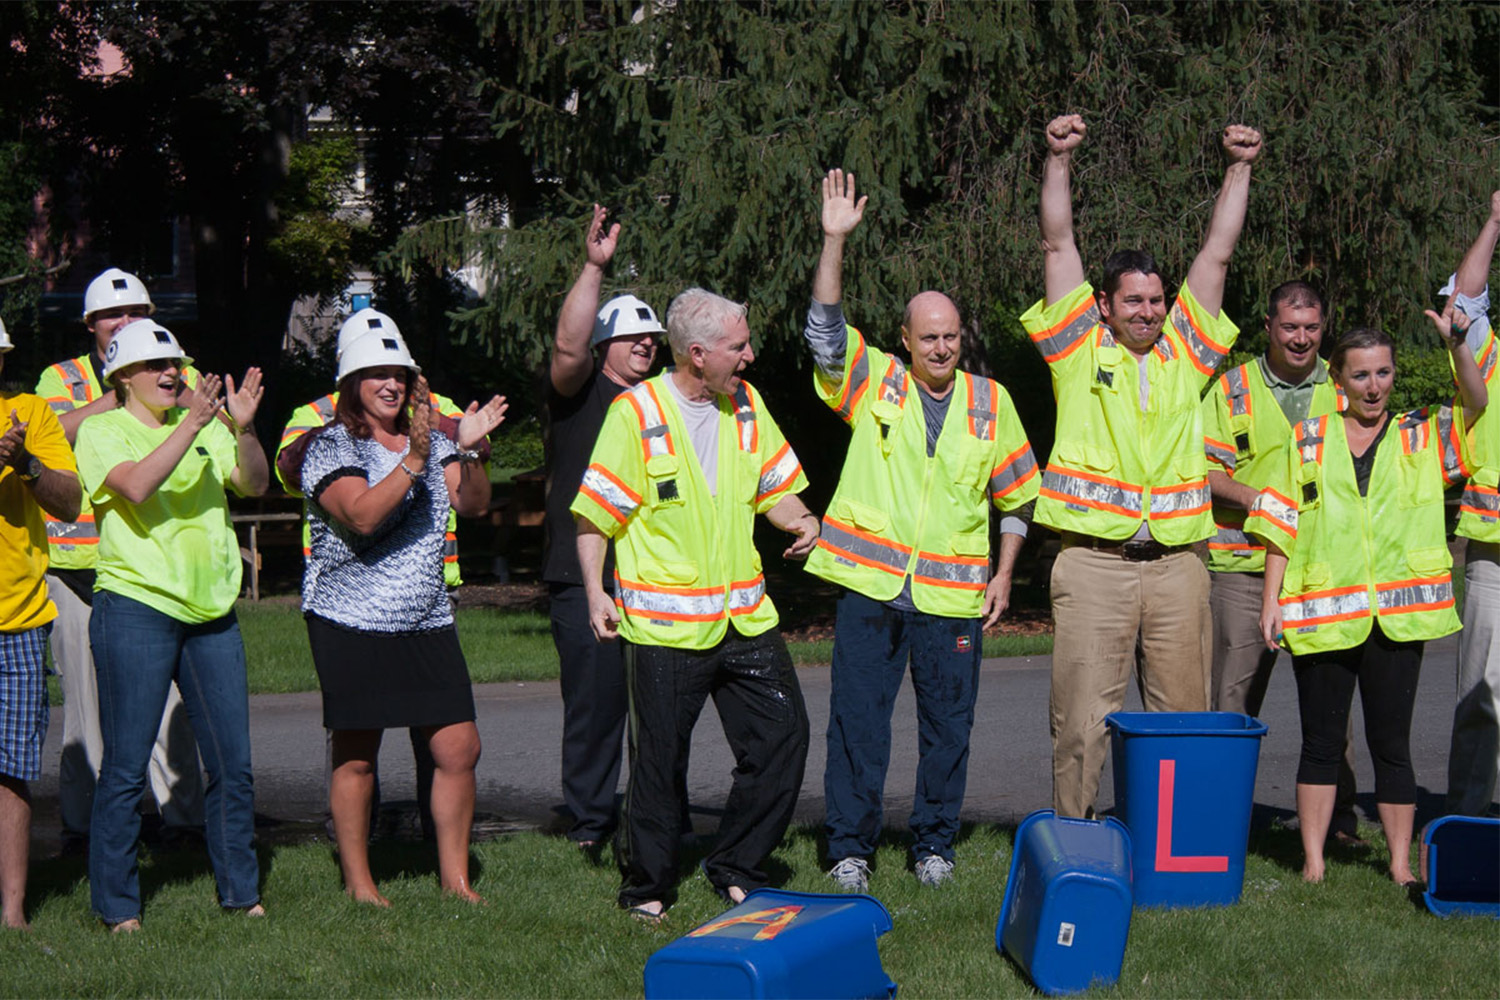 John calls out The Architectural Team, DPR Construction, and Cannistraro to complete the Ice Bucket Challenge.